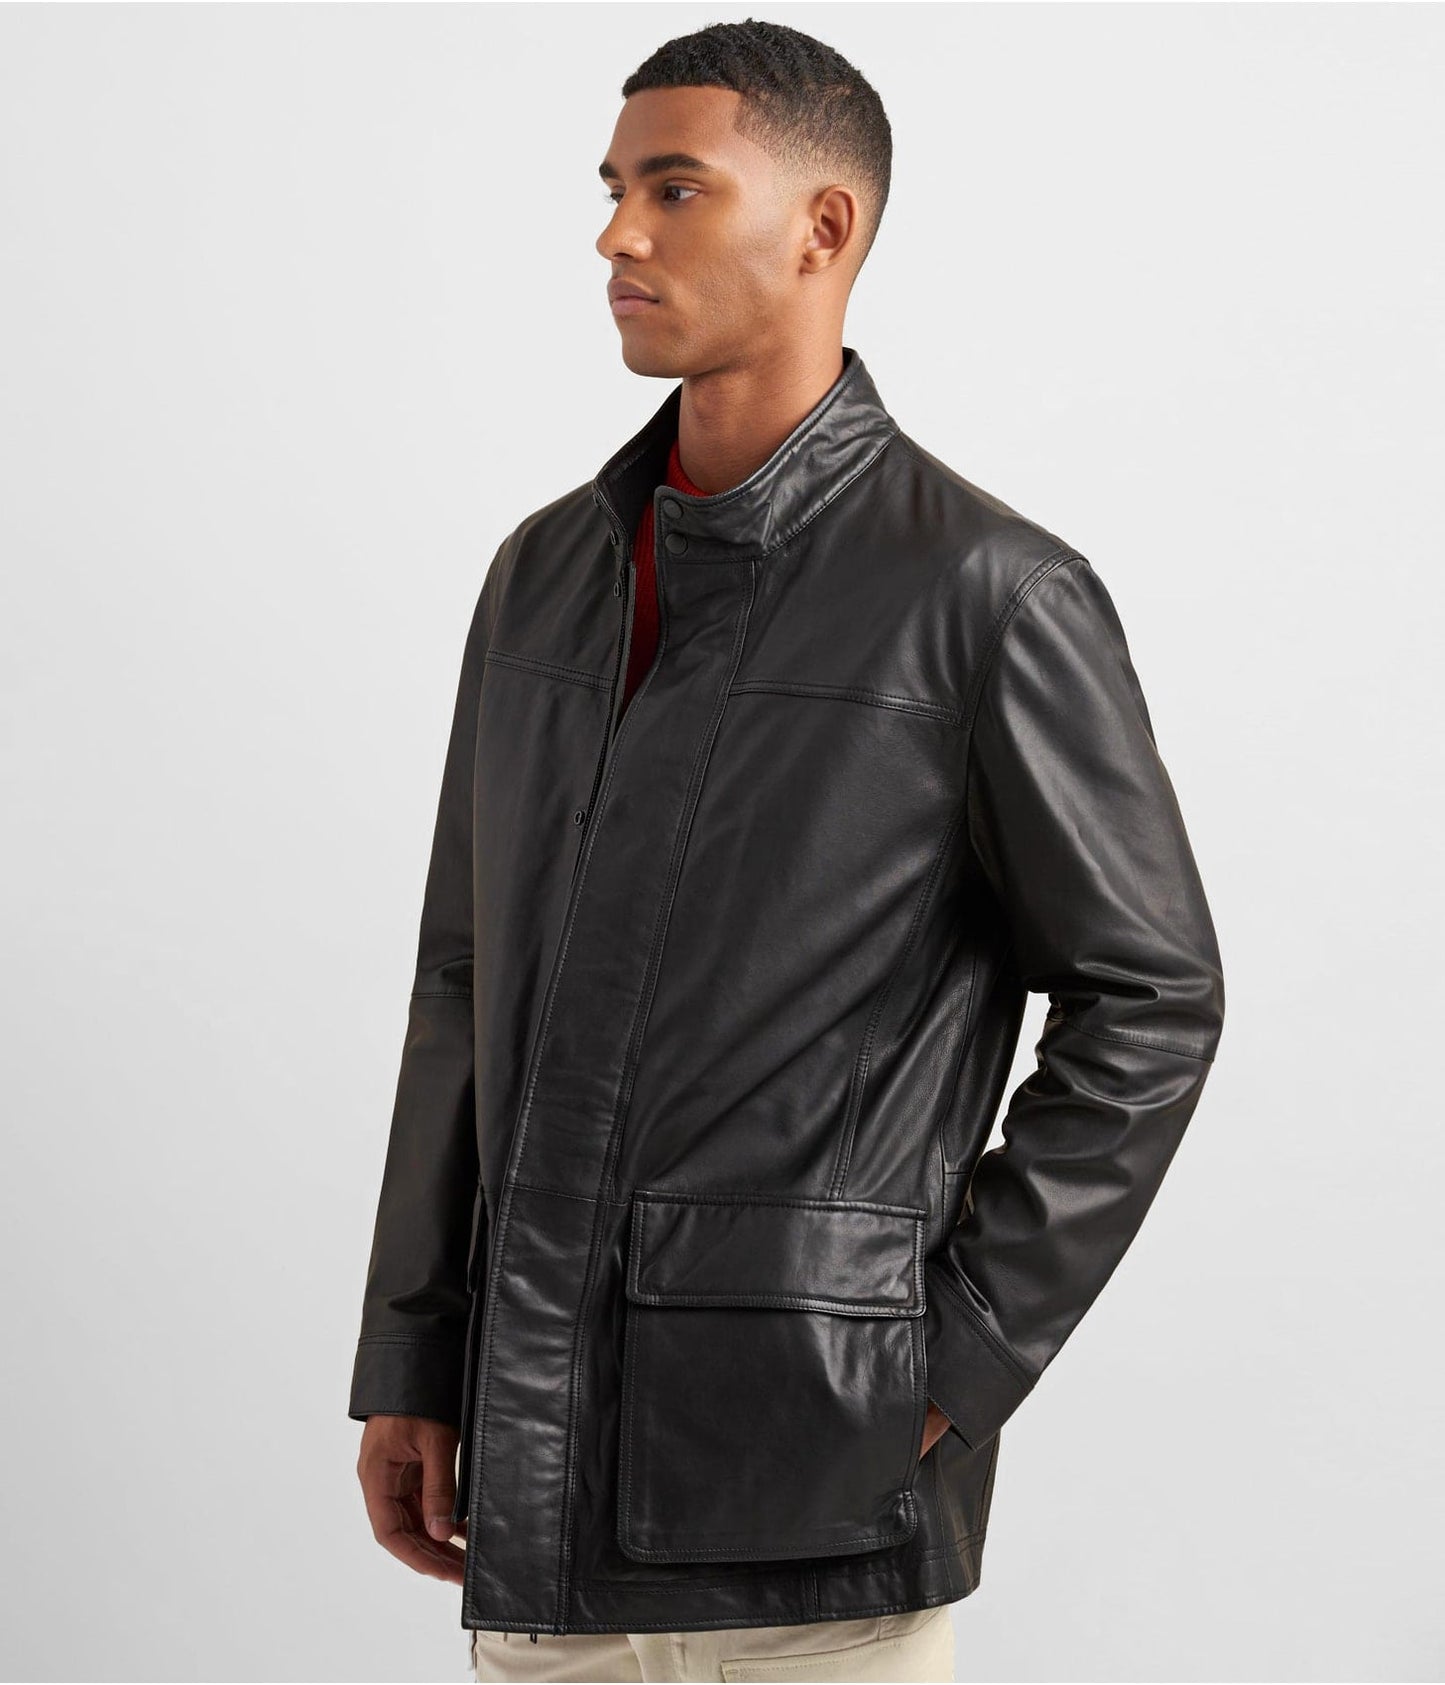 Men's Leather Coat In Black With Patch Pockets